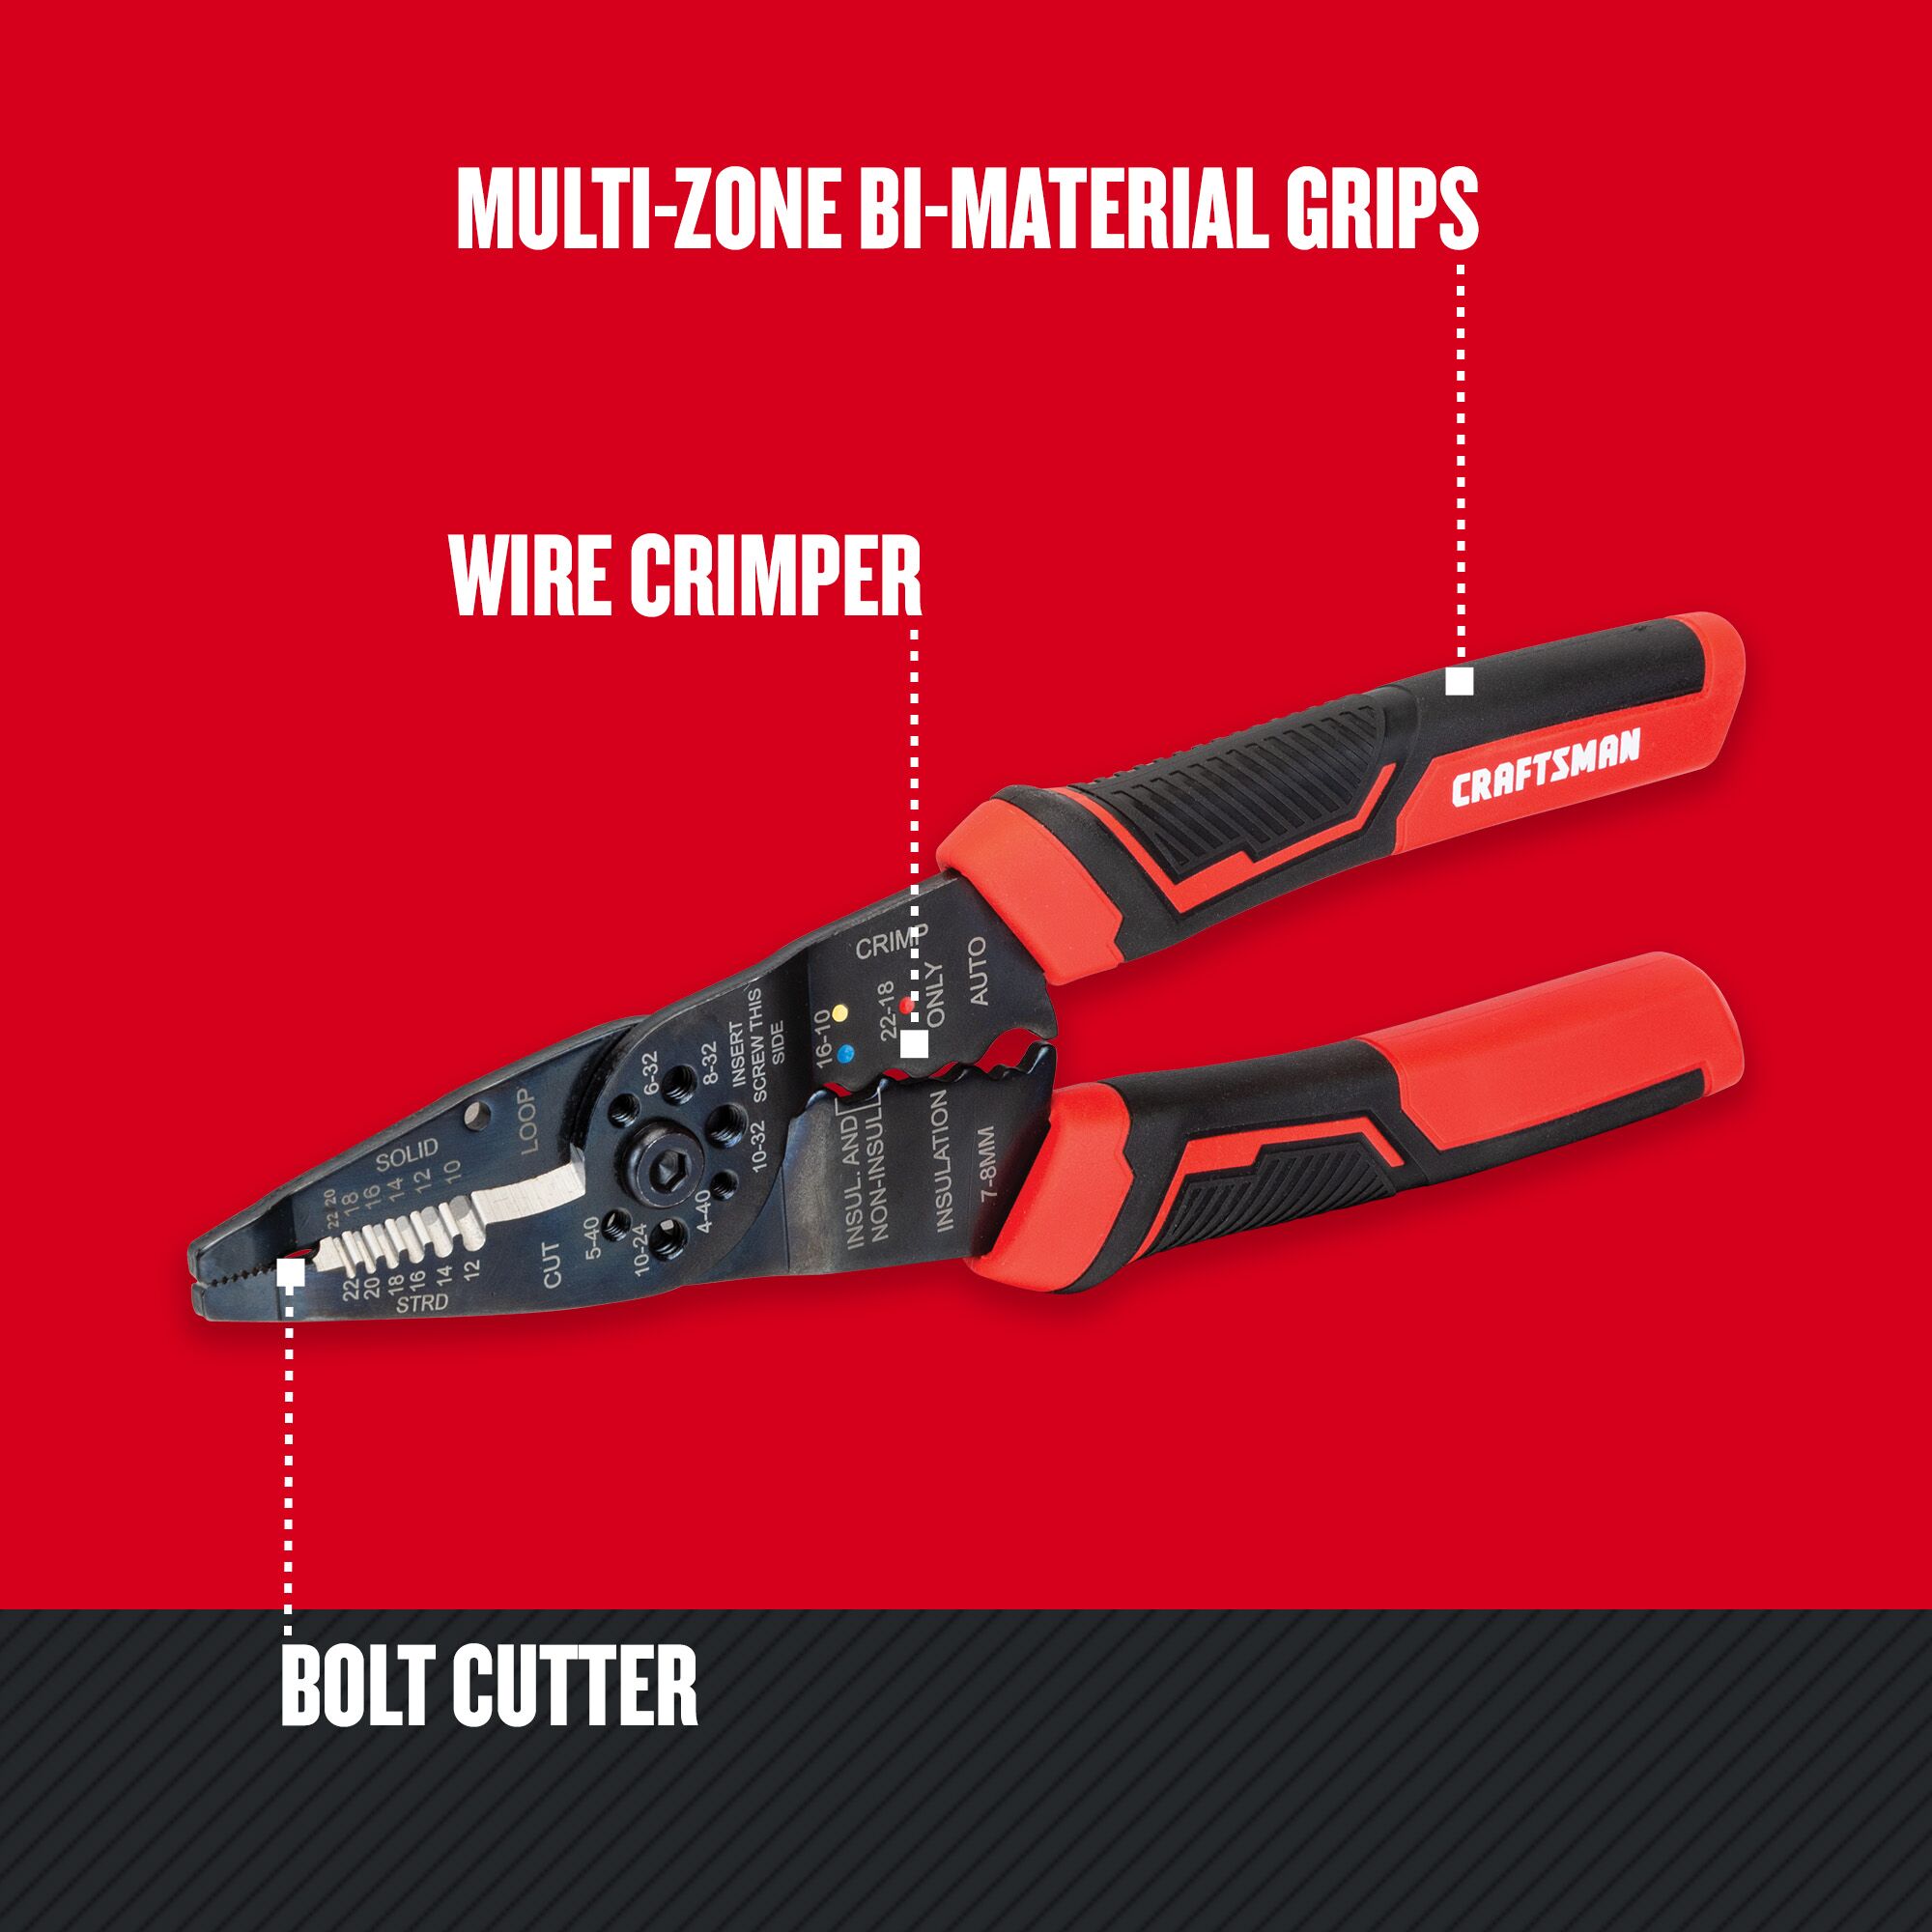 Graphic of CRAFTSMAN Wire Crimper highlighting product features